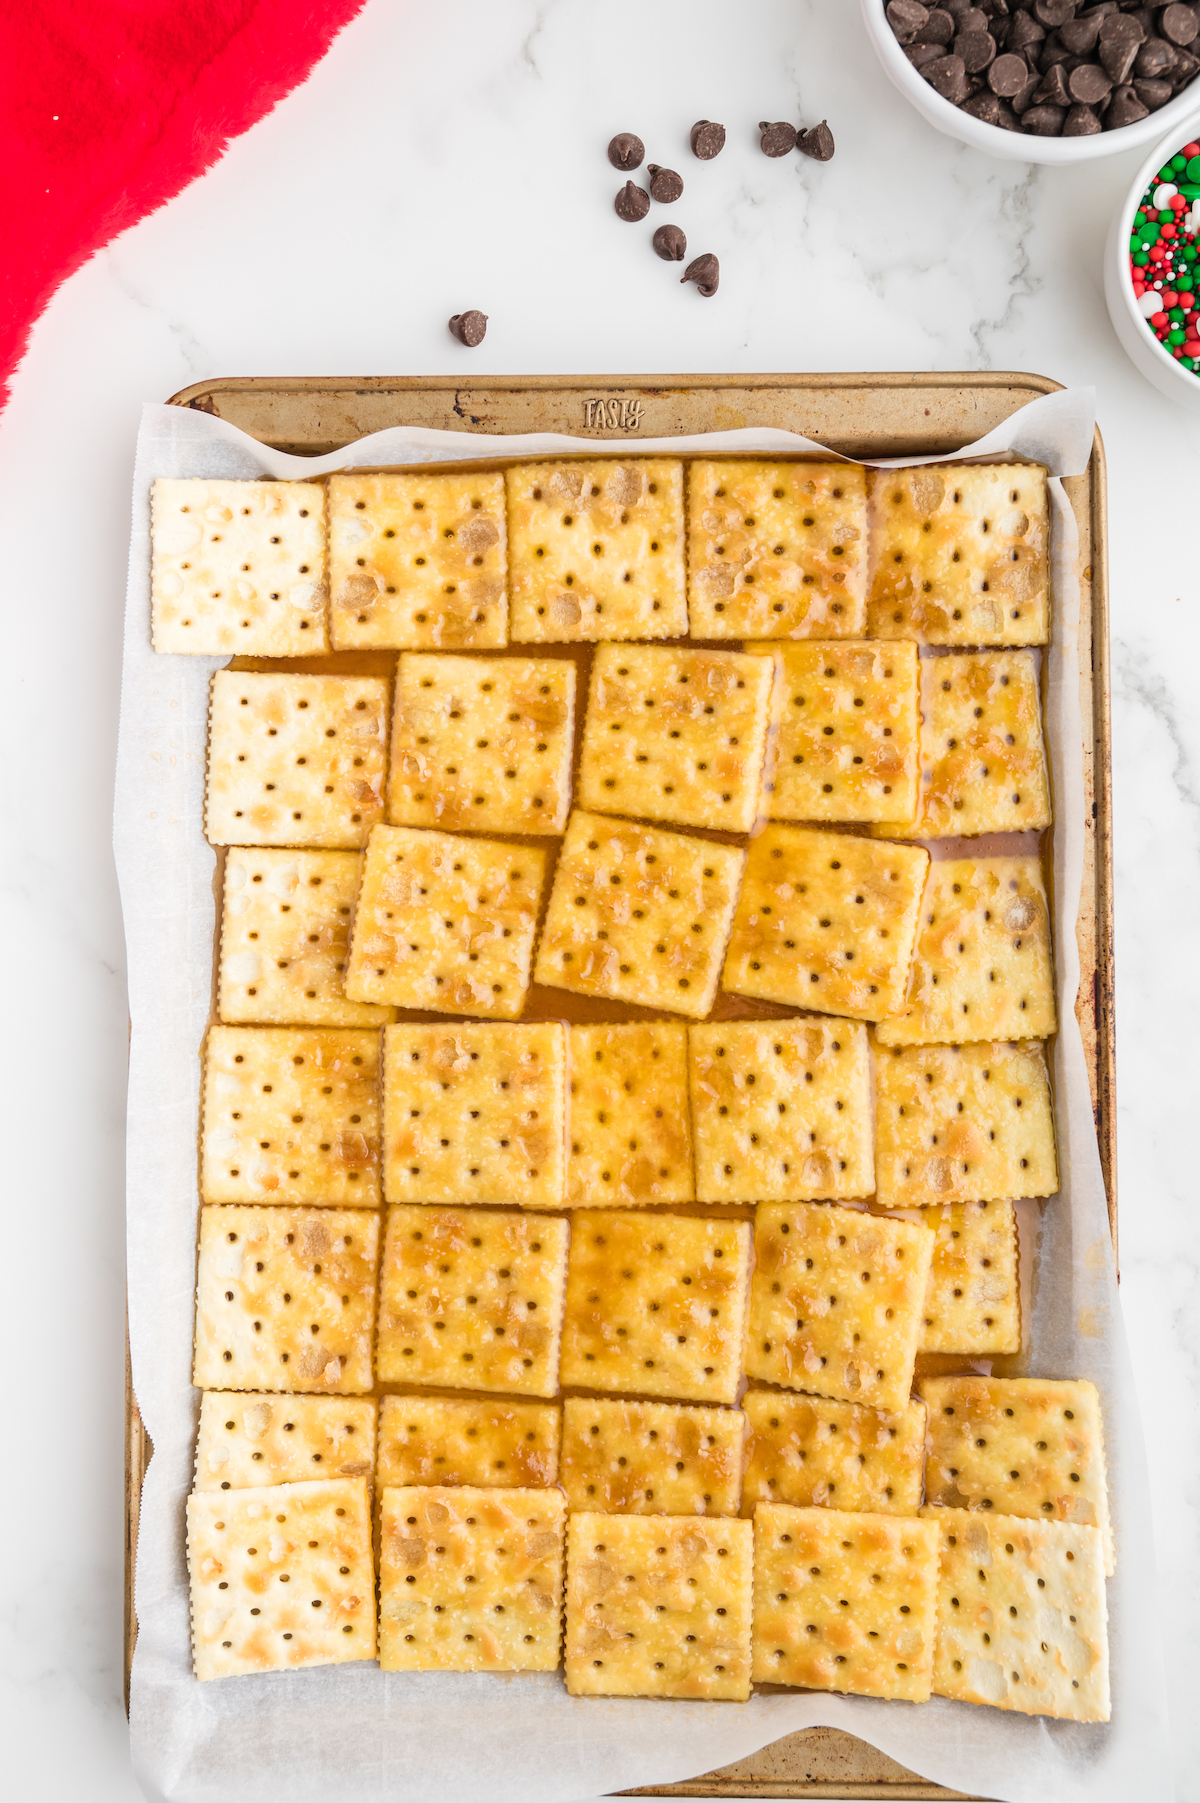 Butter and brown sugar mixture poured over the saltine crackers